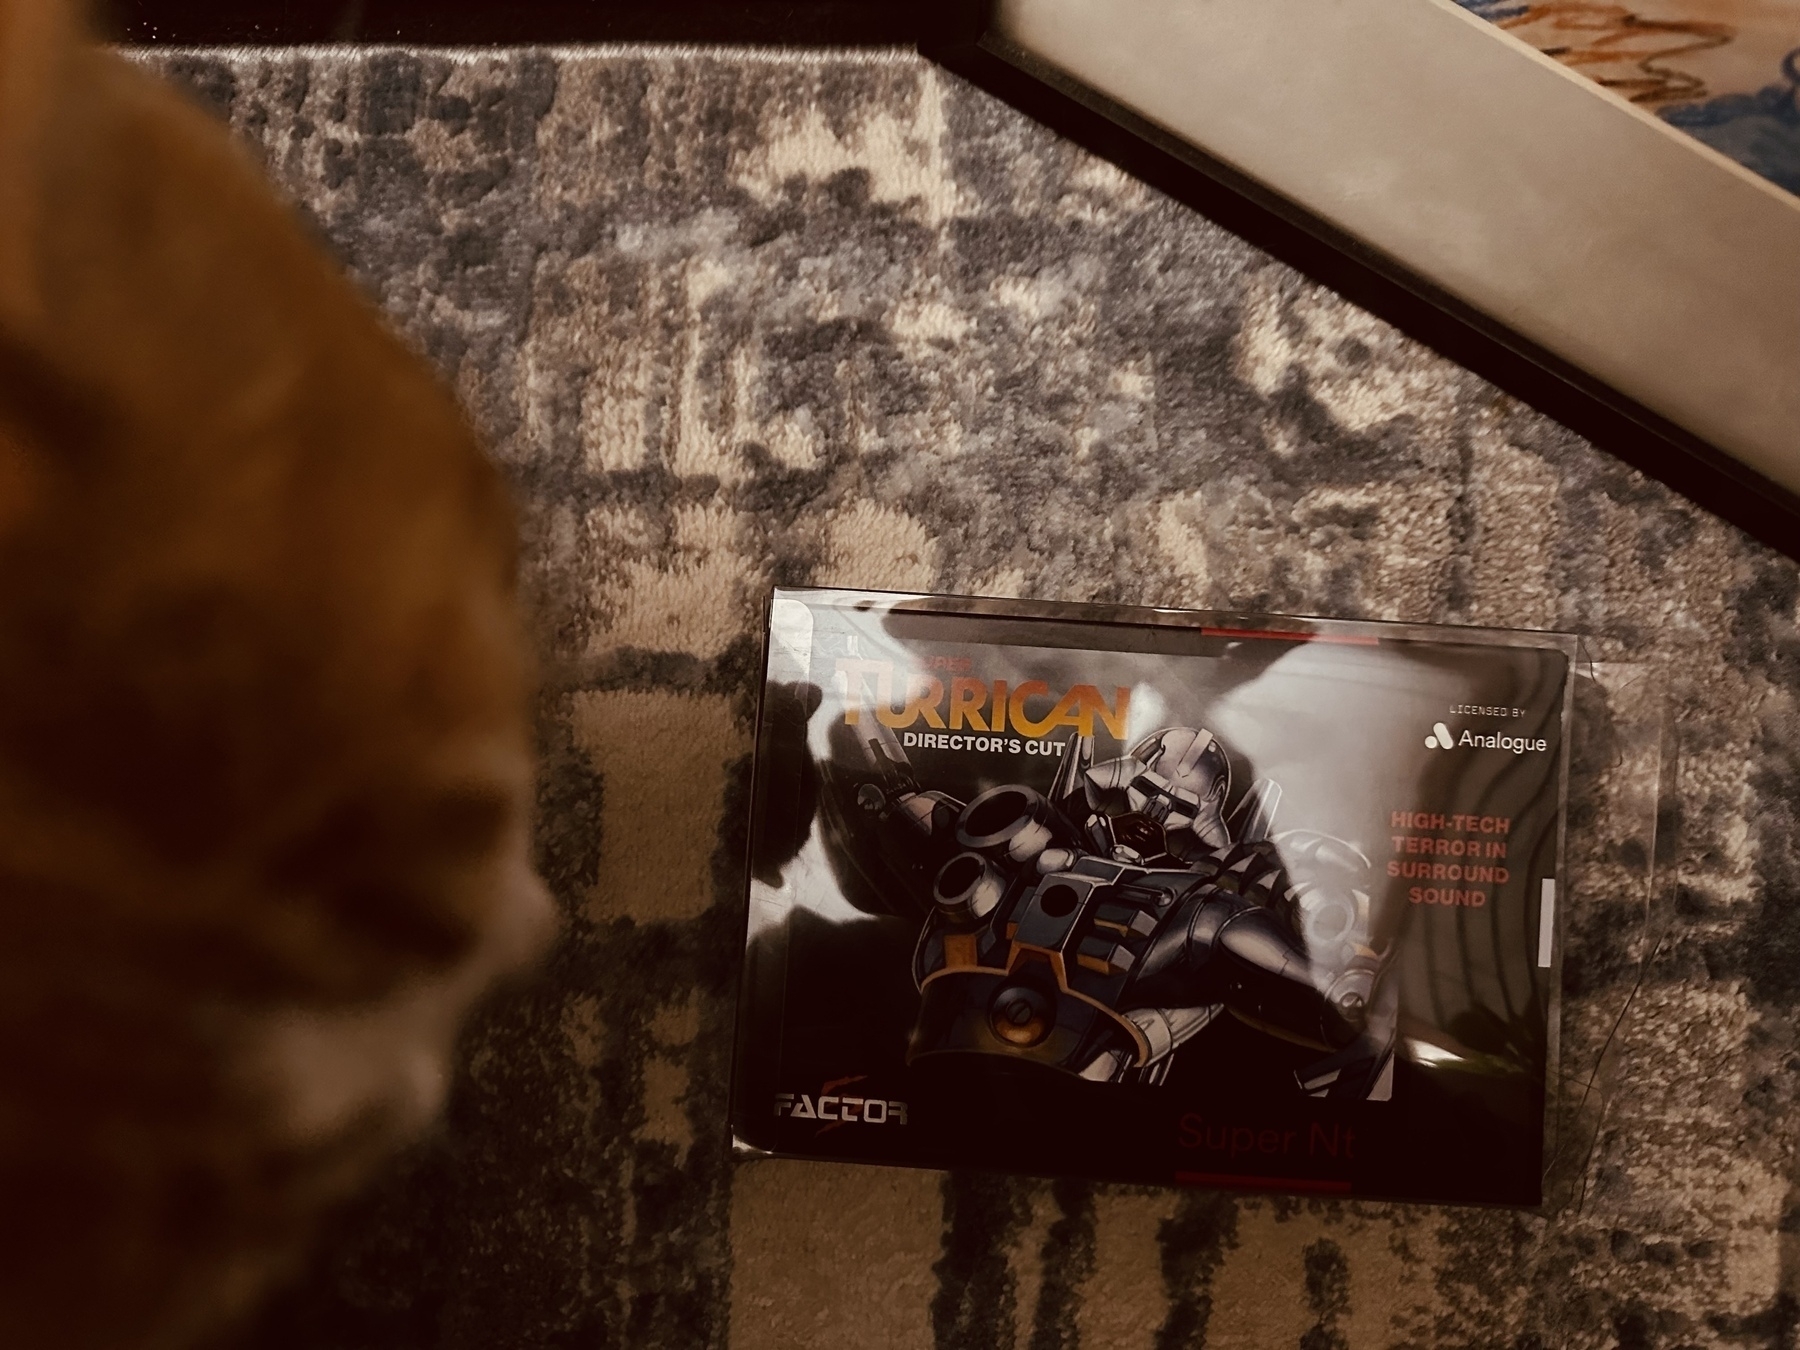 The box of Suoer Turrican: Director’s Cut, with a cat visible to the left and a painting to the right 